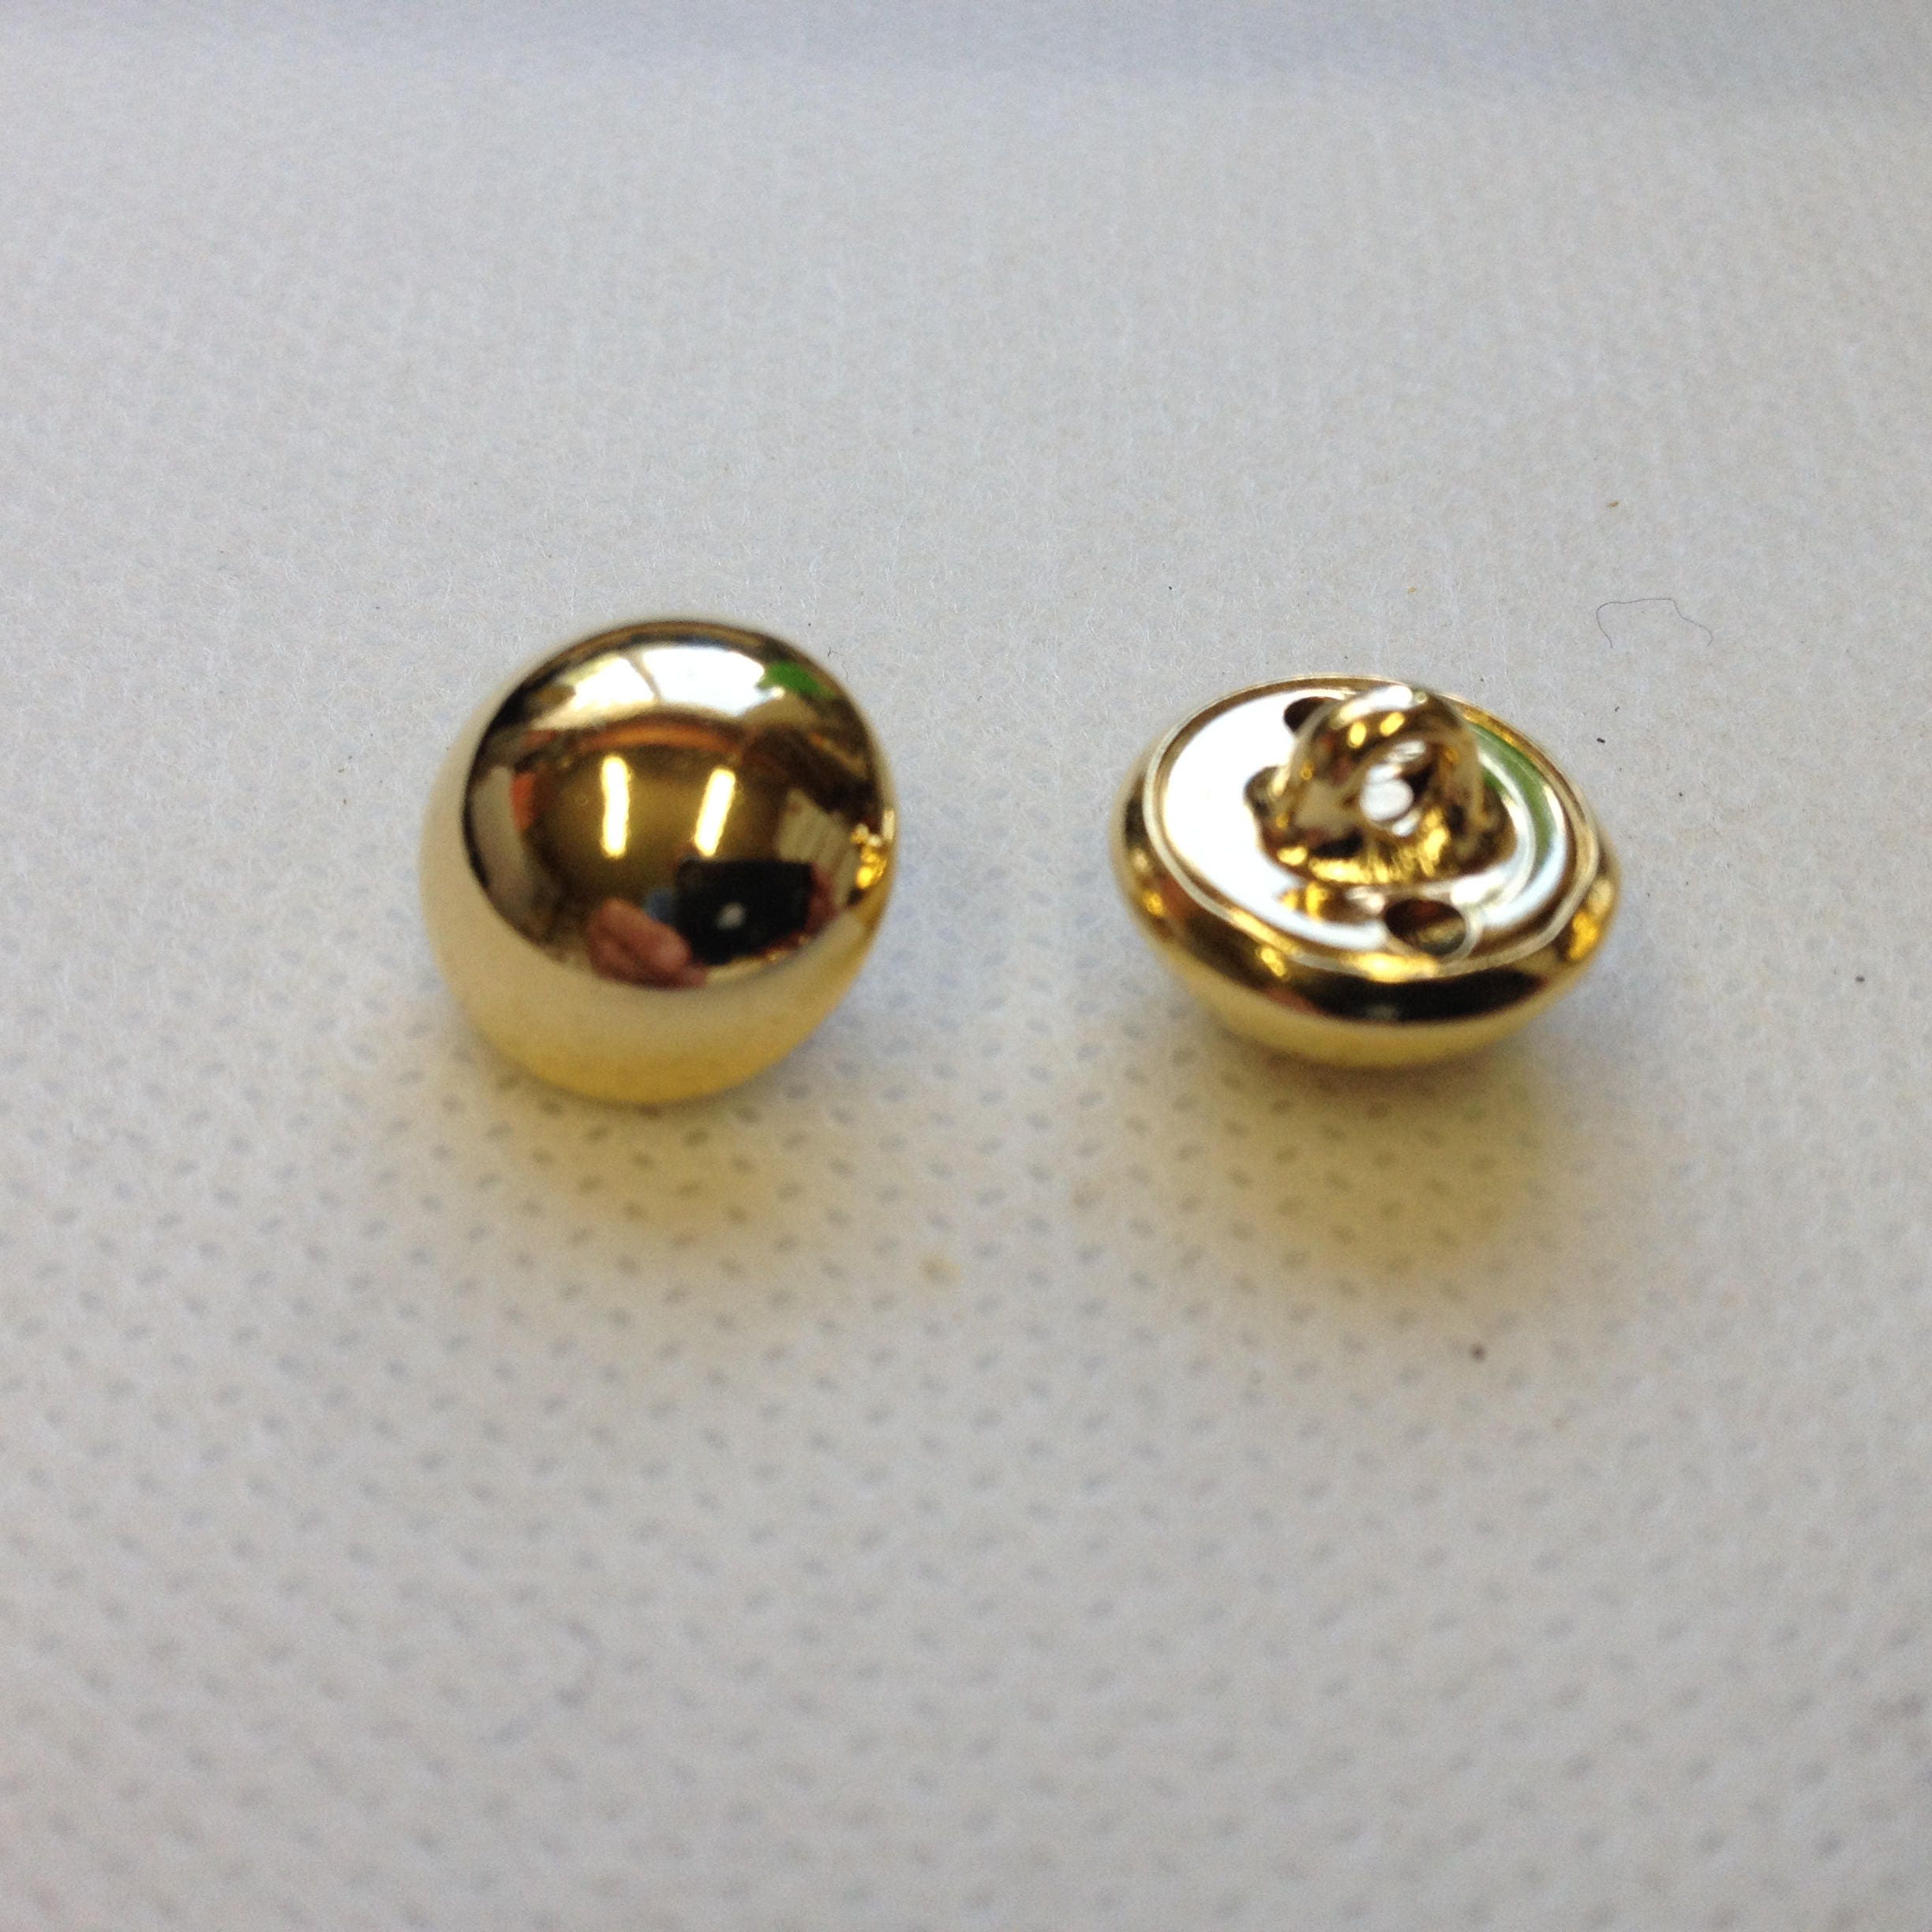 GOLD BUTTON. Half Ball. Size 1/212MM. Small gold | Etsy